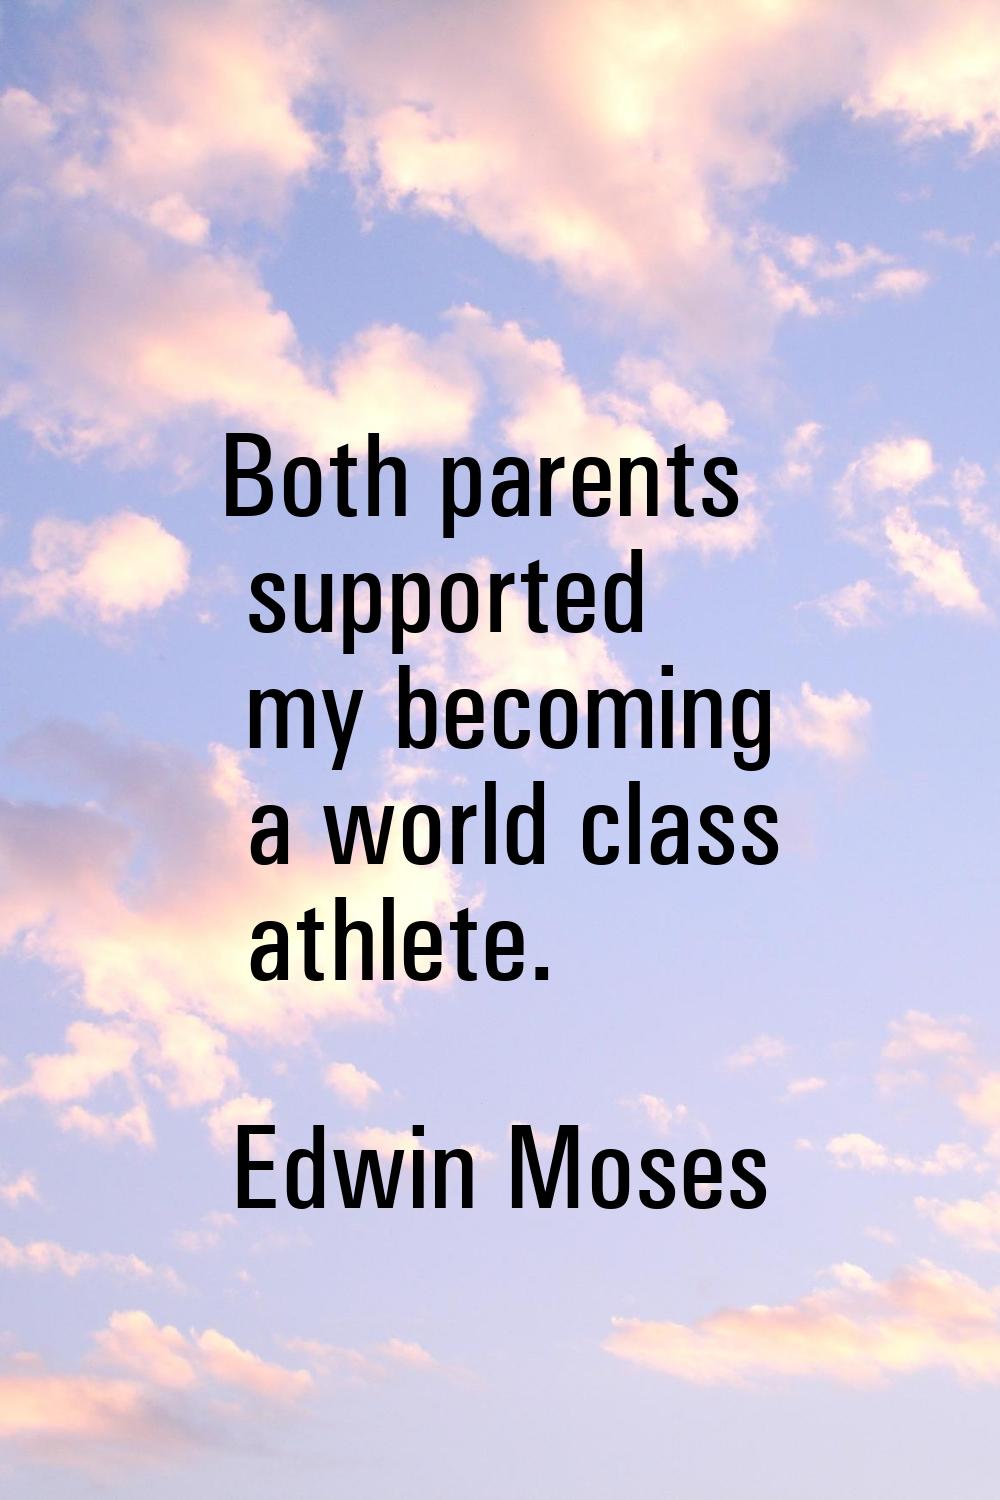 Both parents supported my becoming a world class athlete.